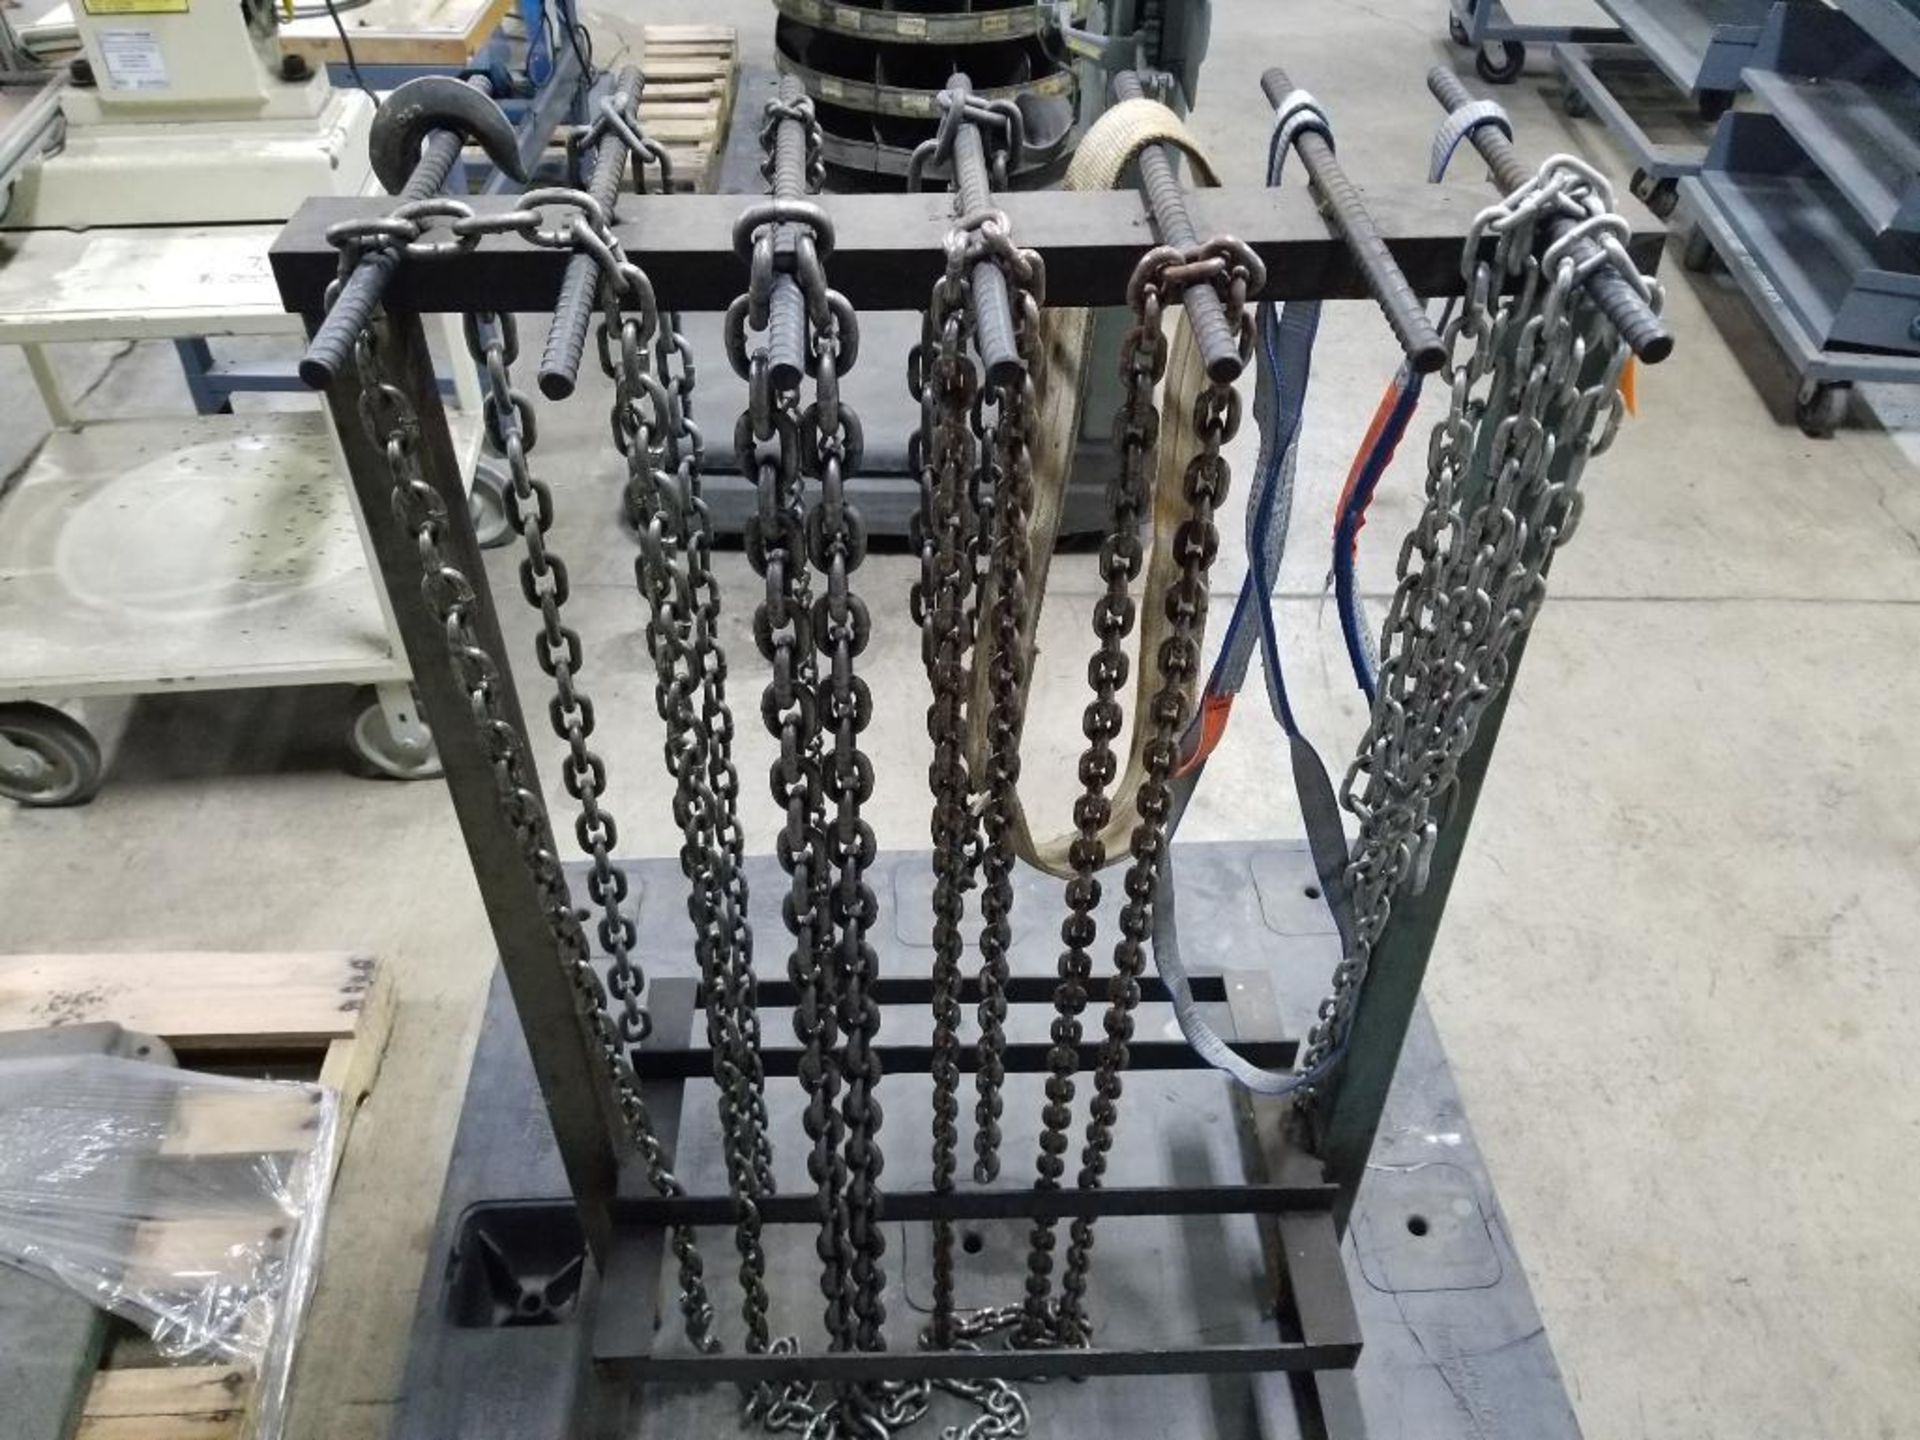 Chain-fall / straps rack, includes chains and lifting straps as pictured.